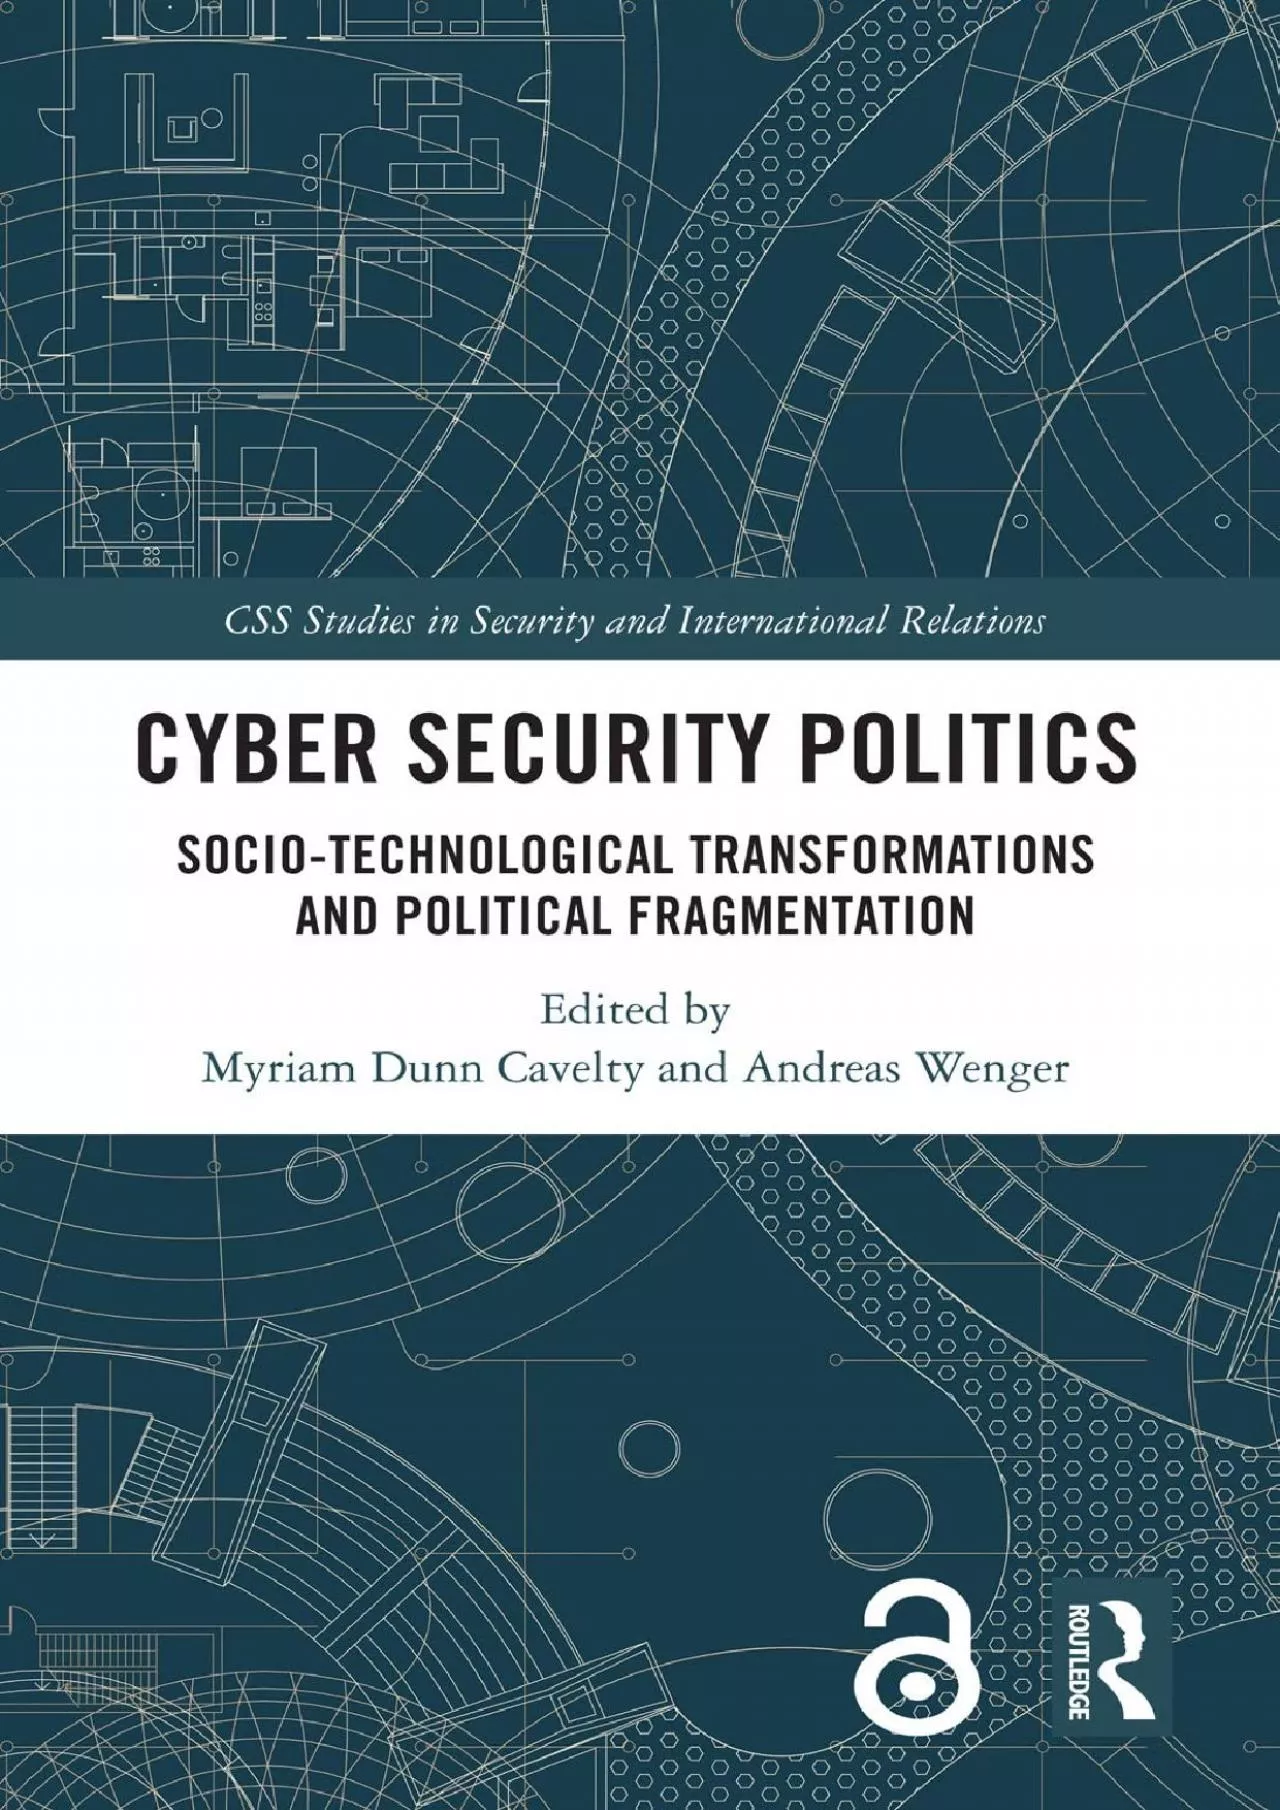 [FREE]-Cyber Security Politics: Socio-Technological Transformations and Political Fragmentation